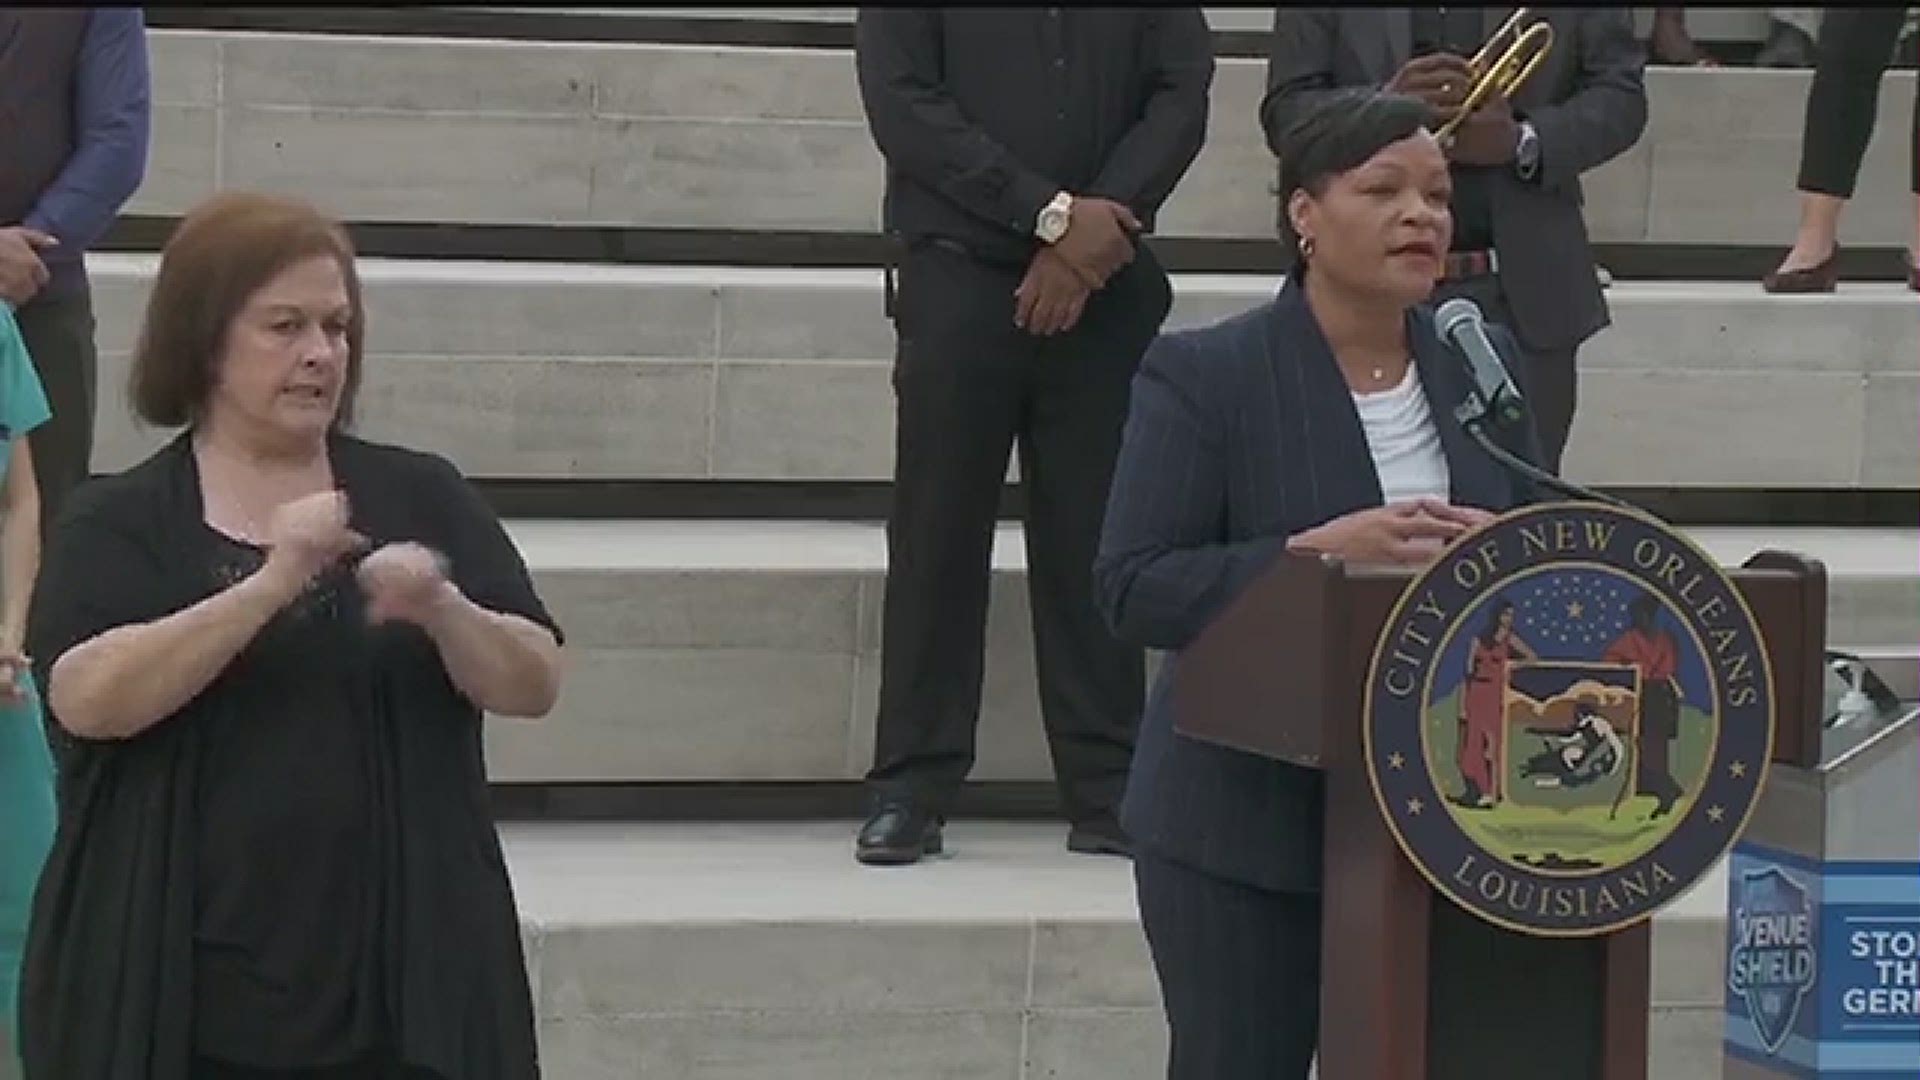 Mayor LaToya Cantrell said that her police department has been authorized to fine people up to $500 if they don't wear a mask where required.